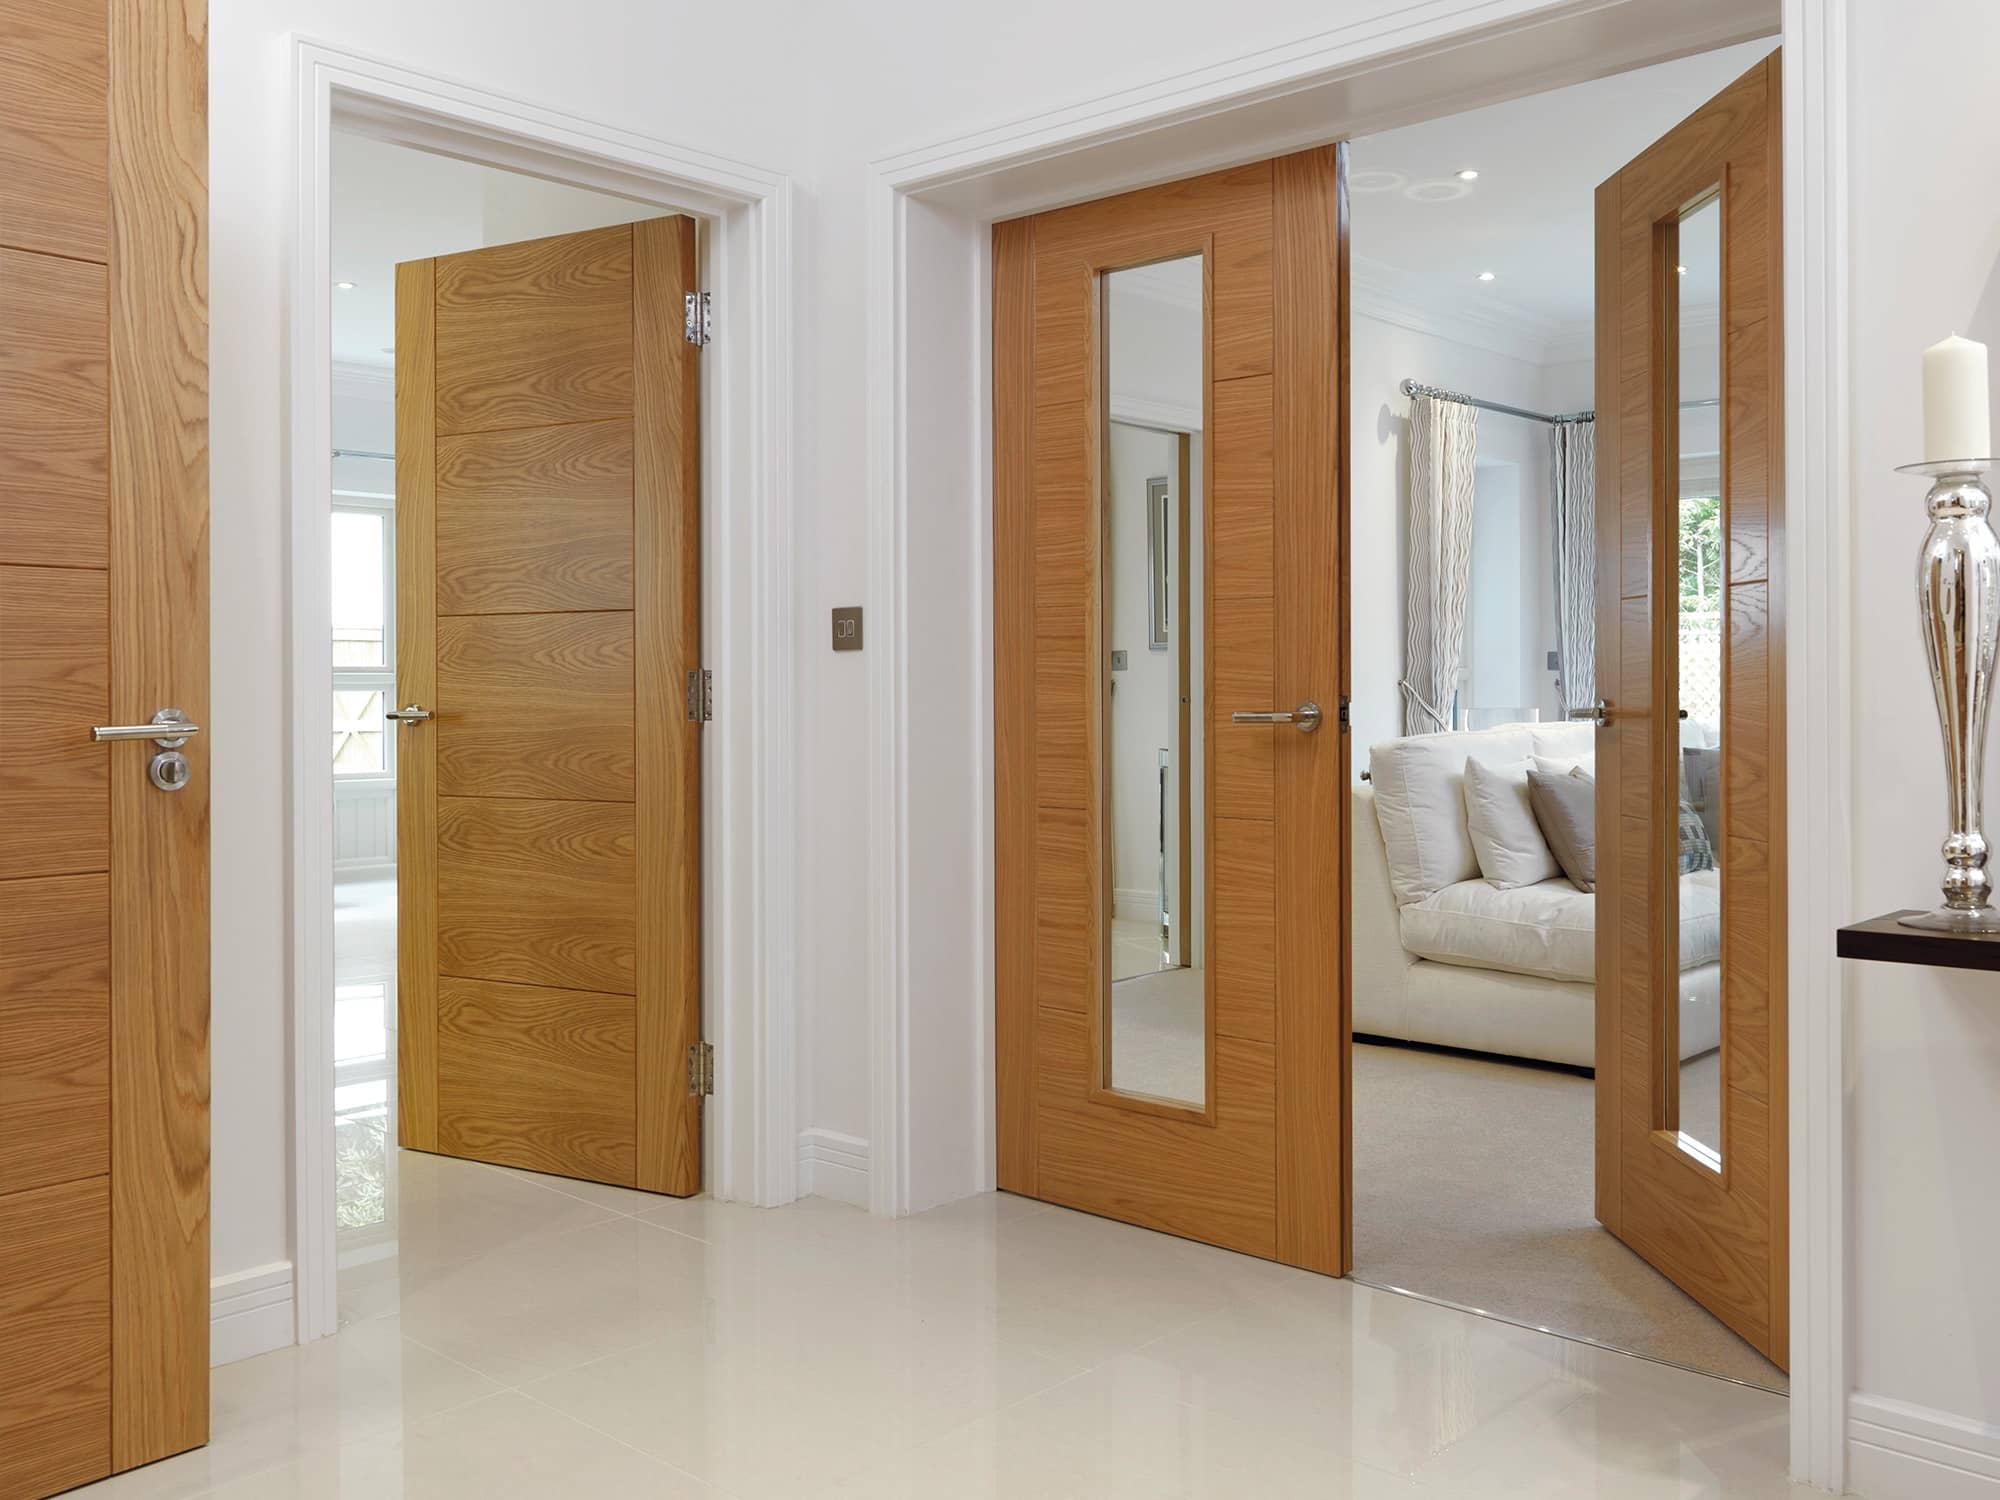 Door Specifications and Terms